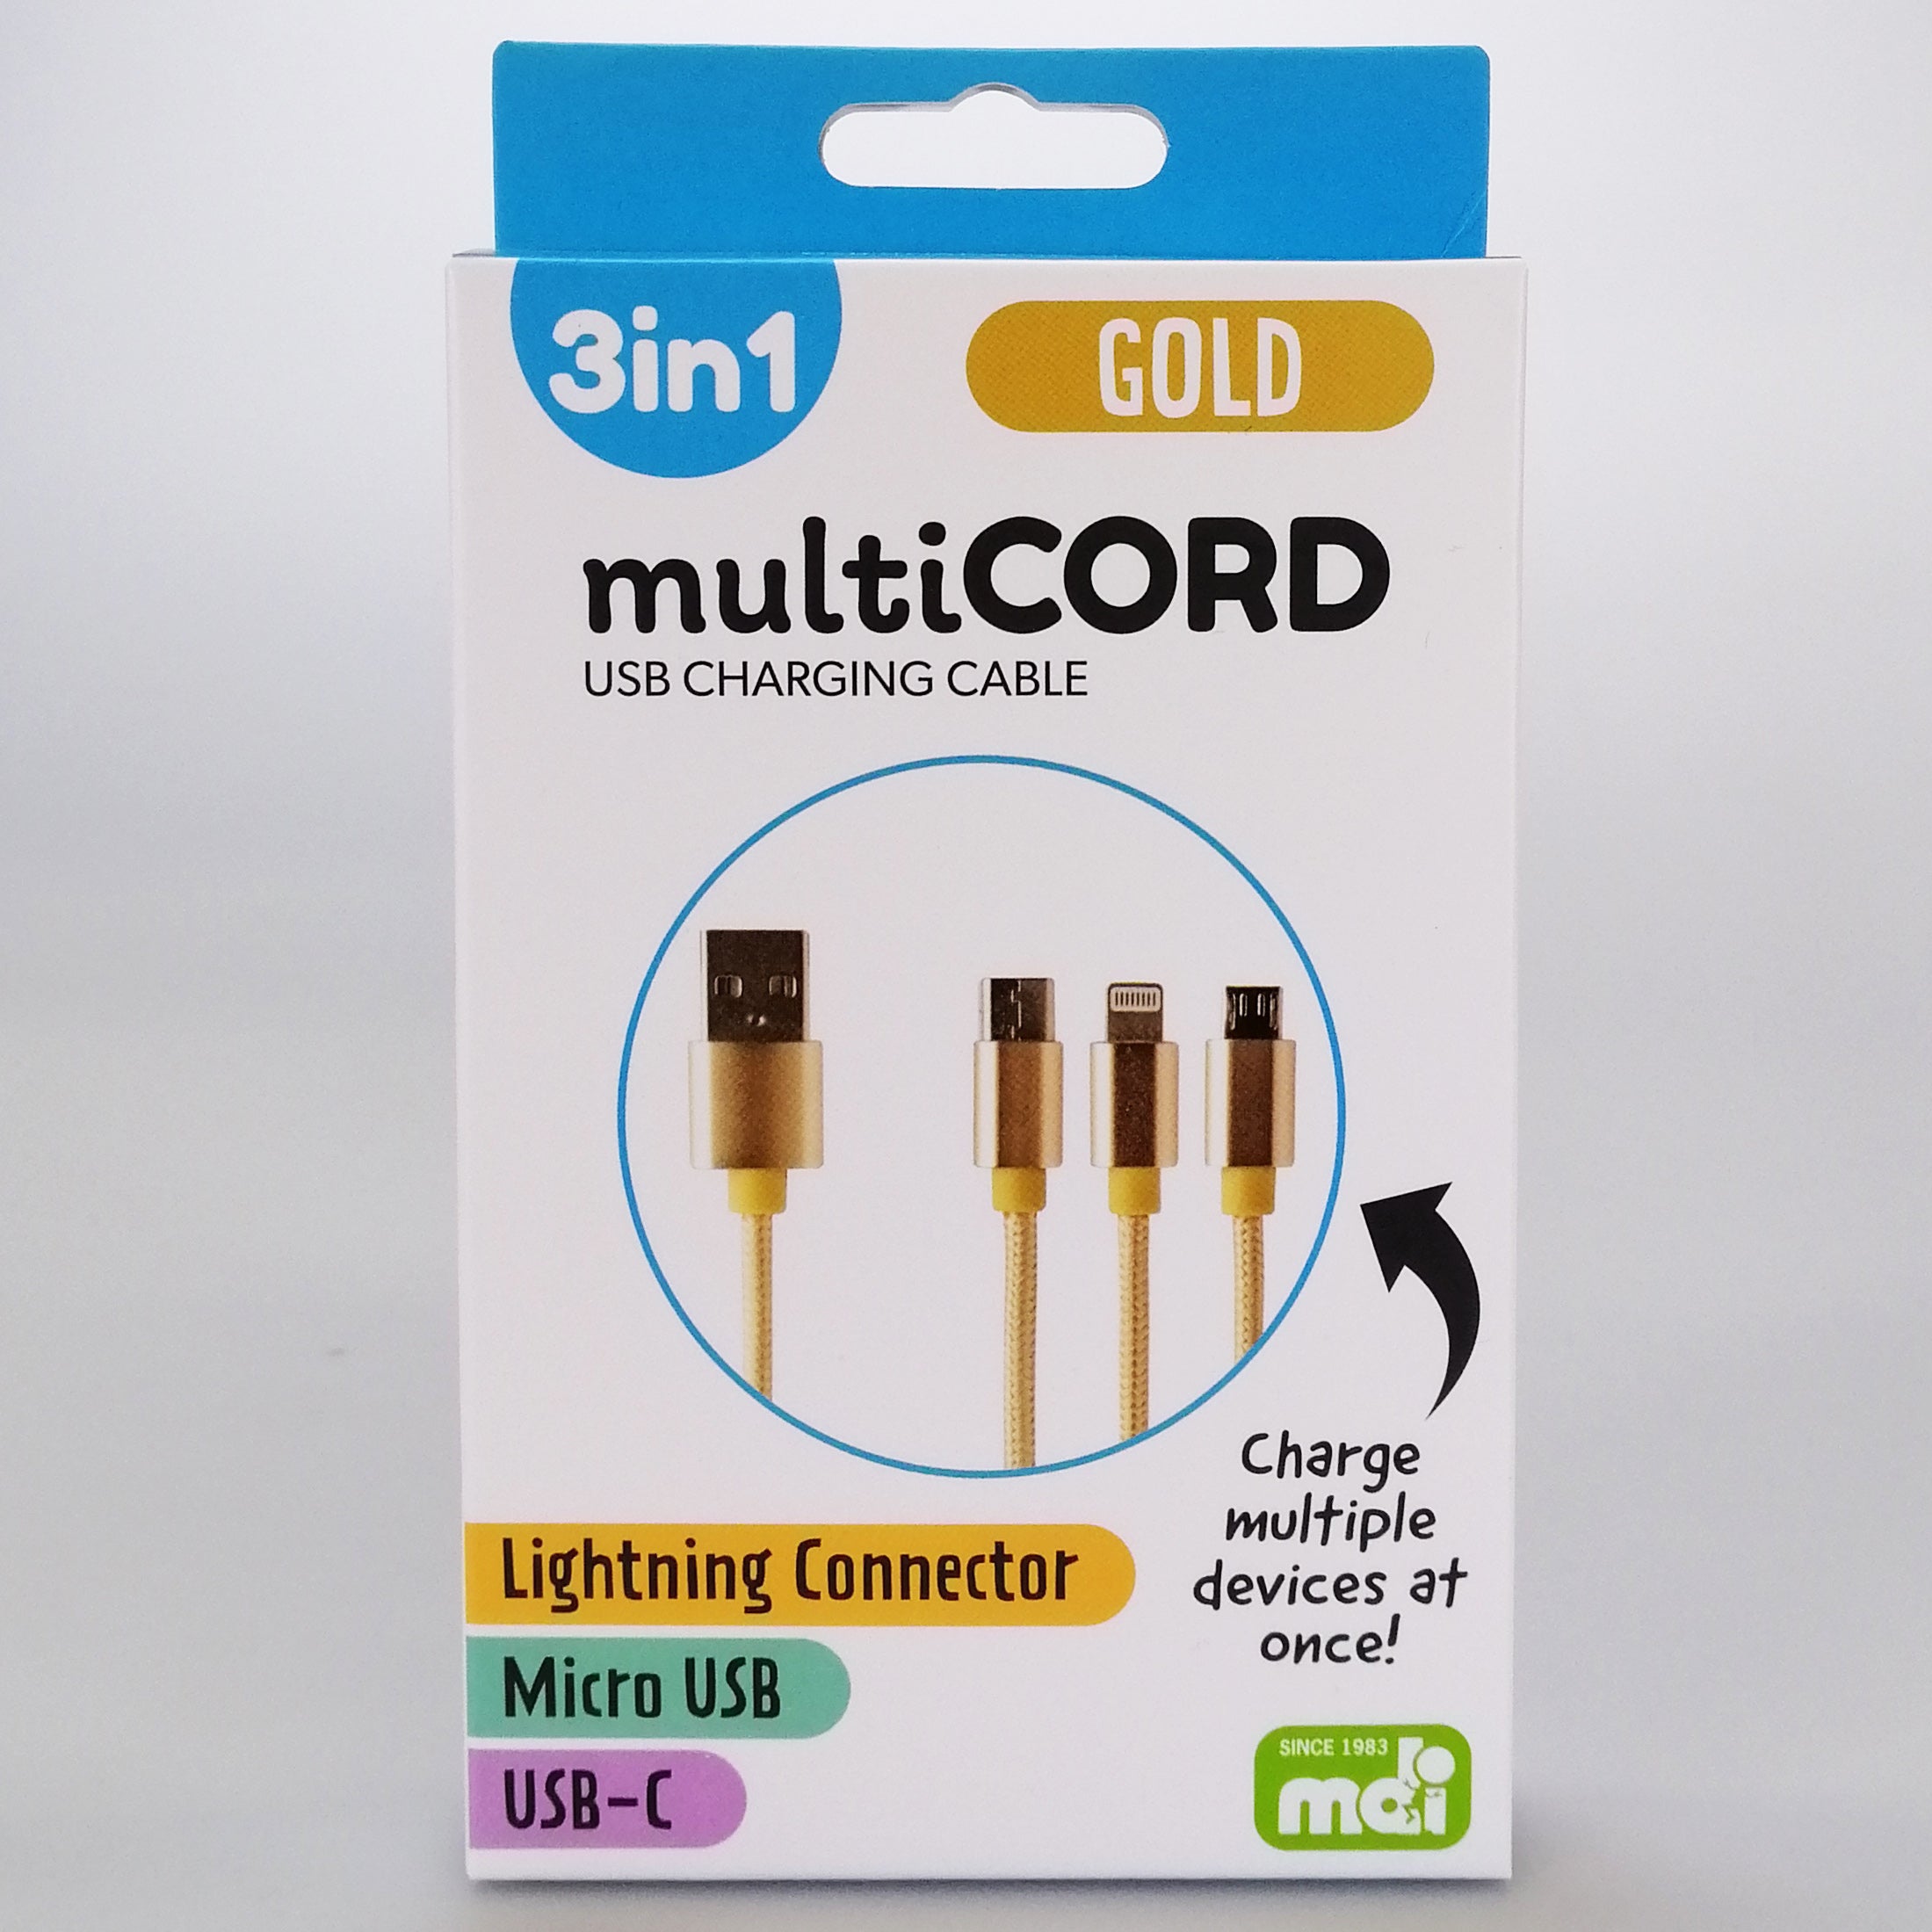 3in1 Multicord USB Charging Cable - Assorted Colours